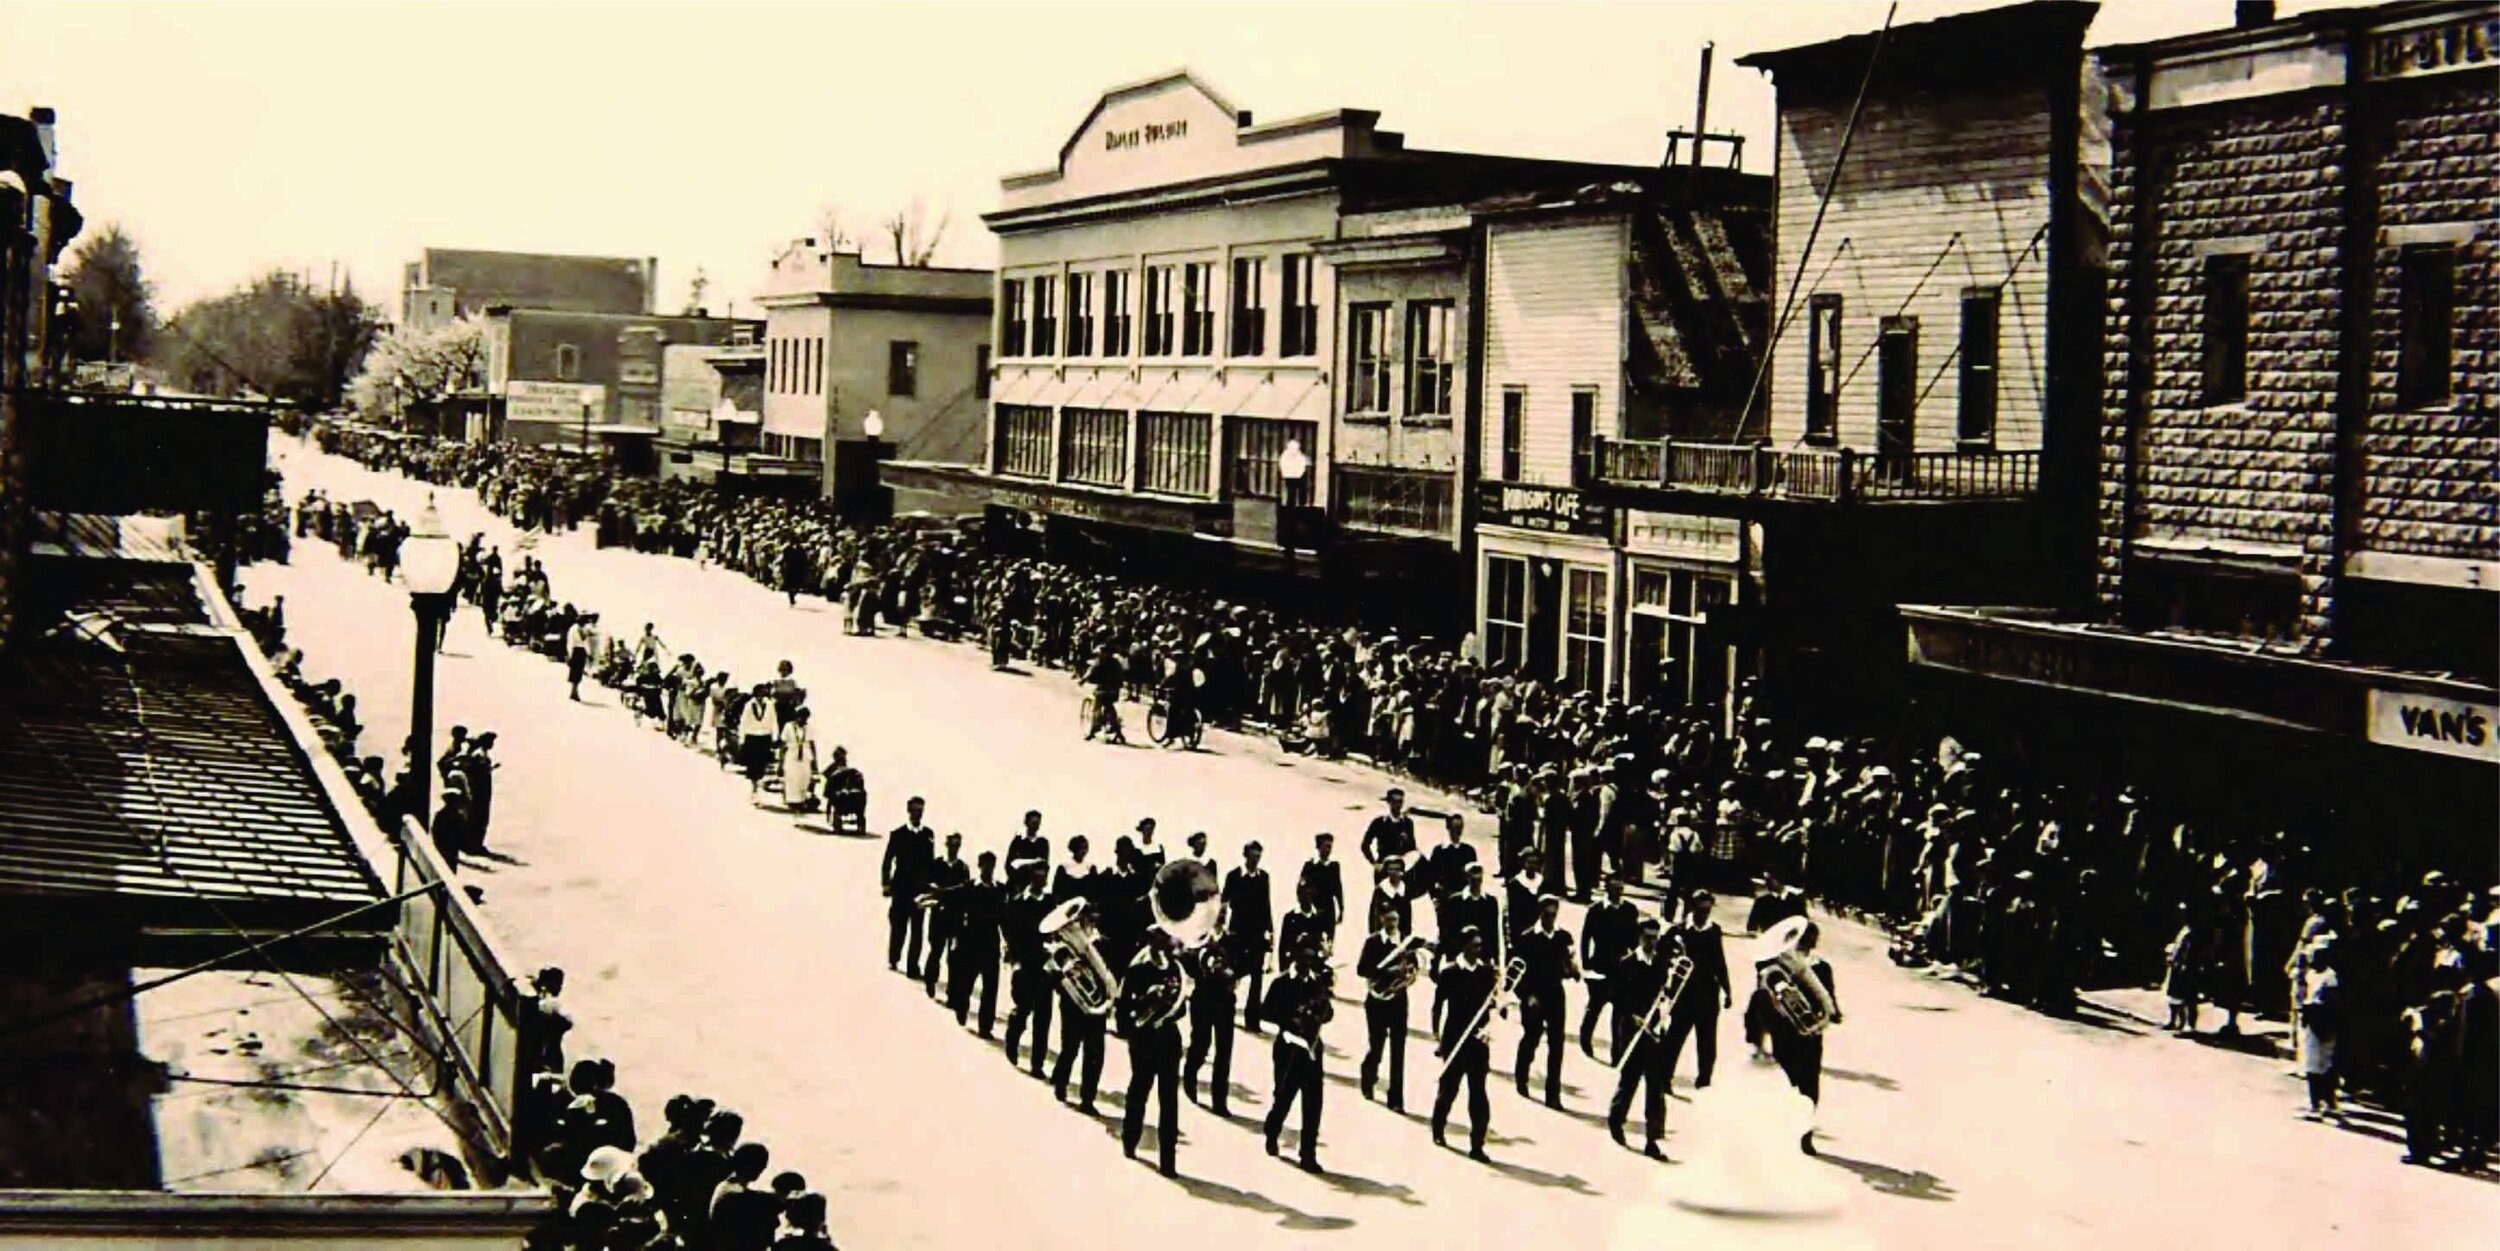 Early 1900, during a parade